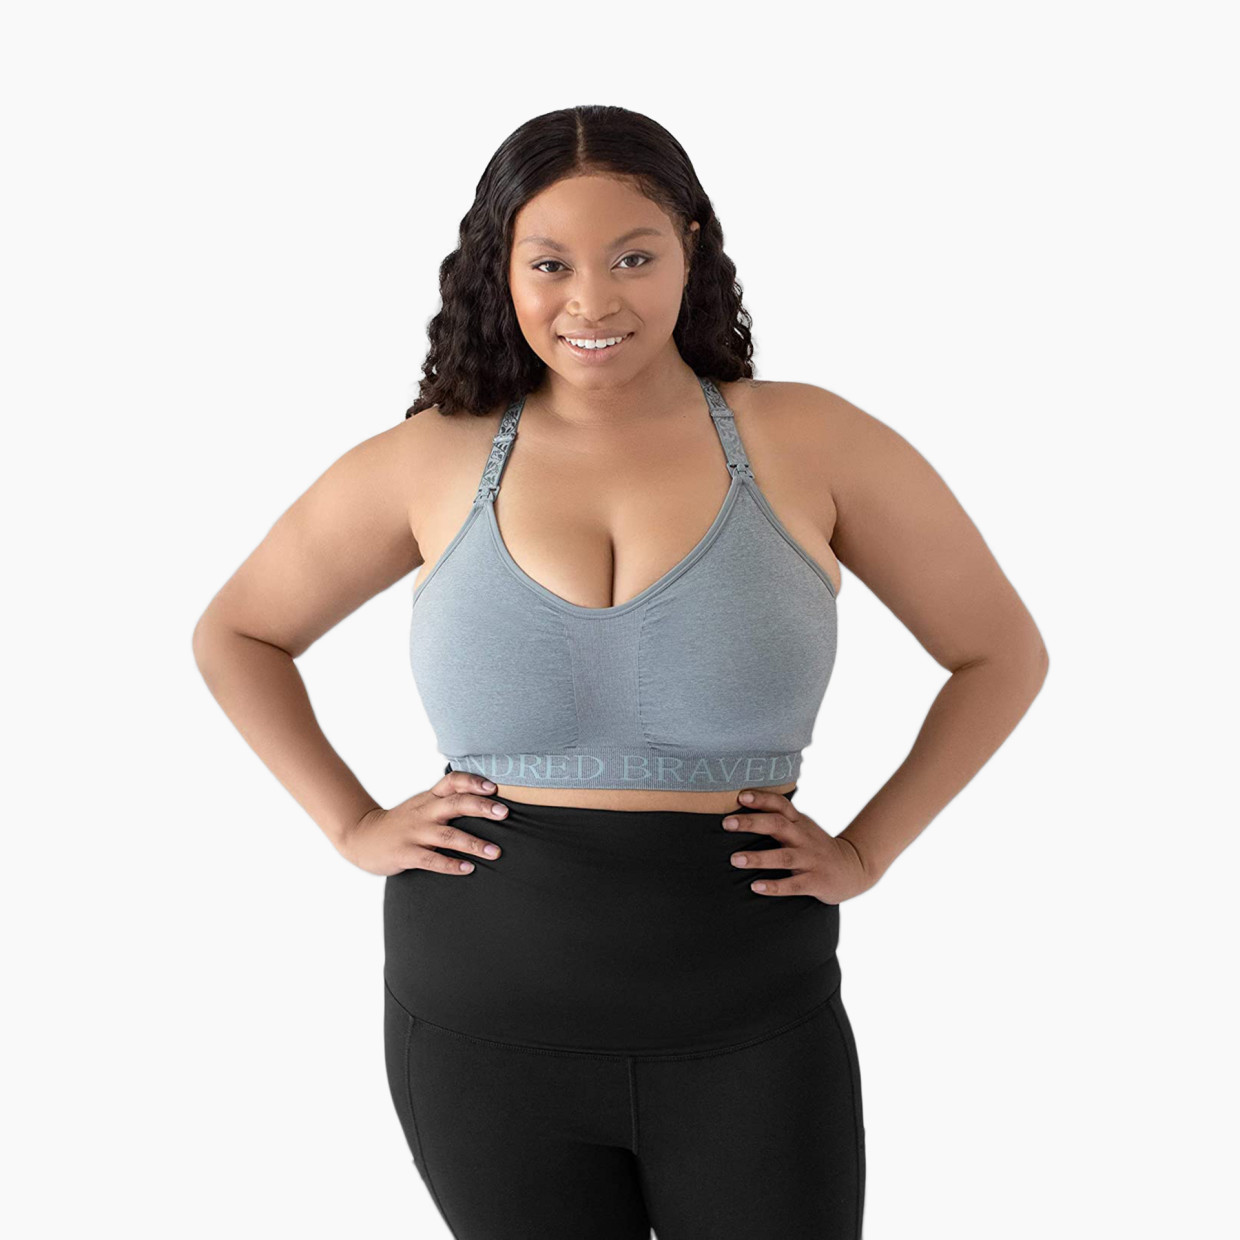 Nursing Bras & Tops  Clothing & Accessories Kindred Bravely